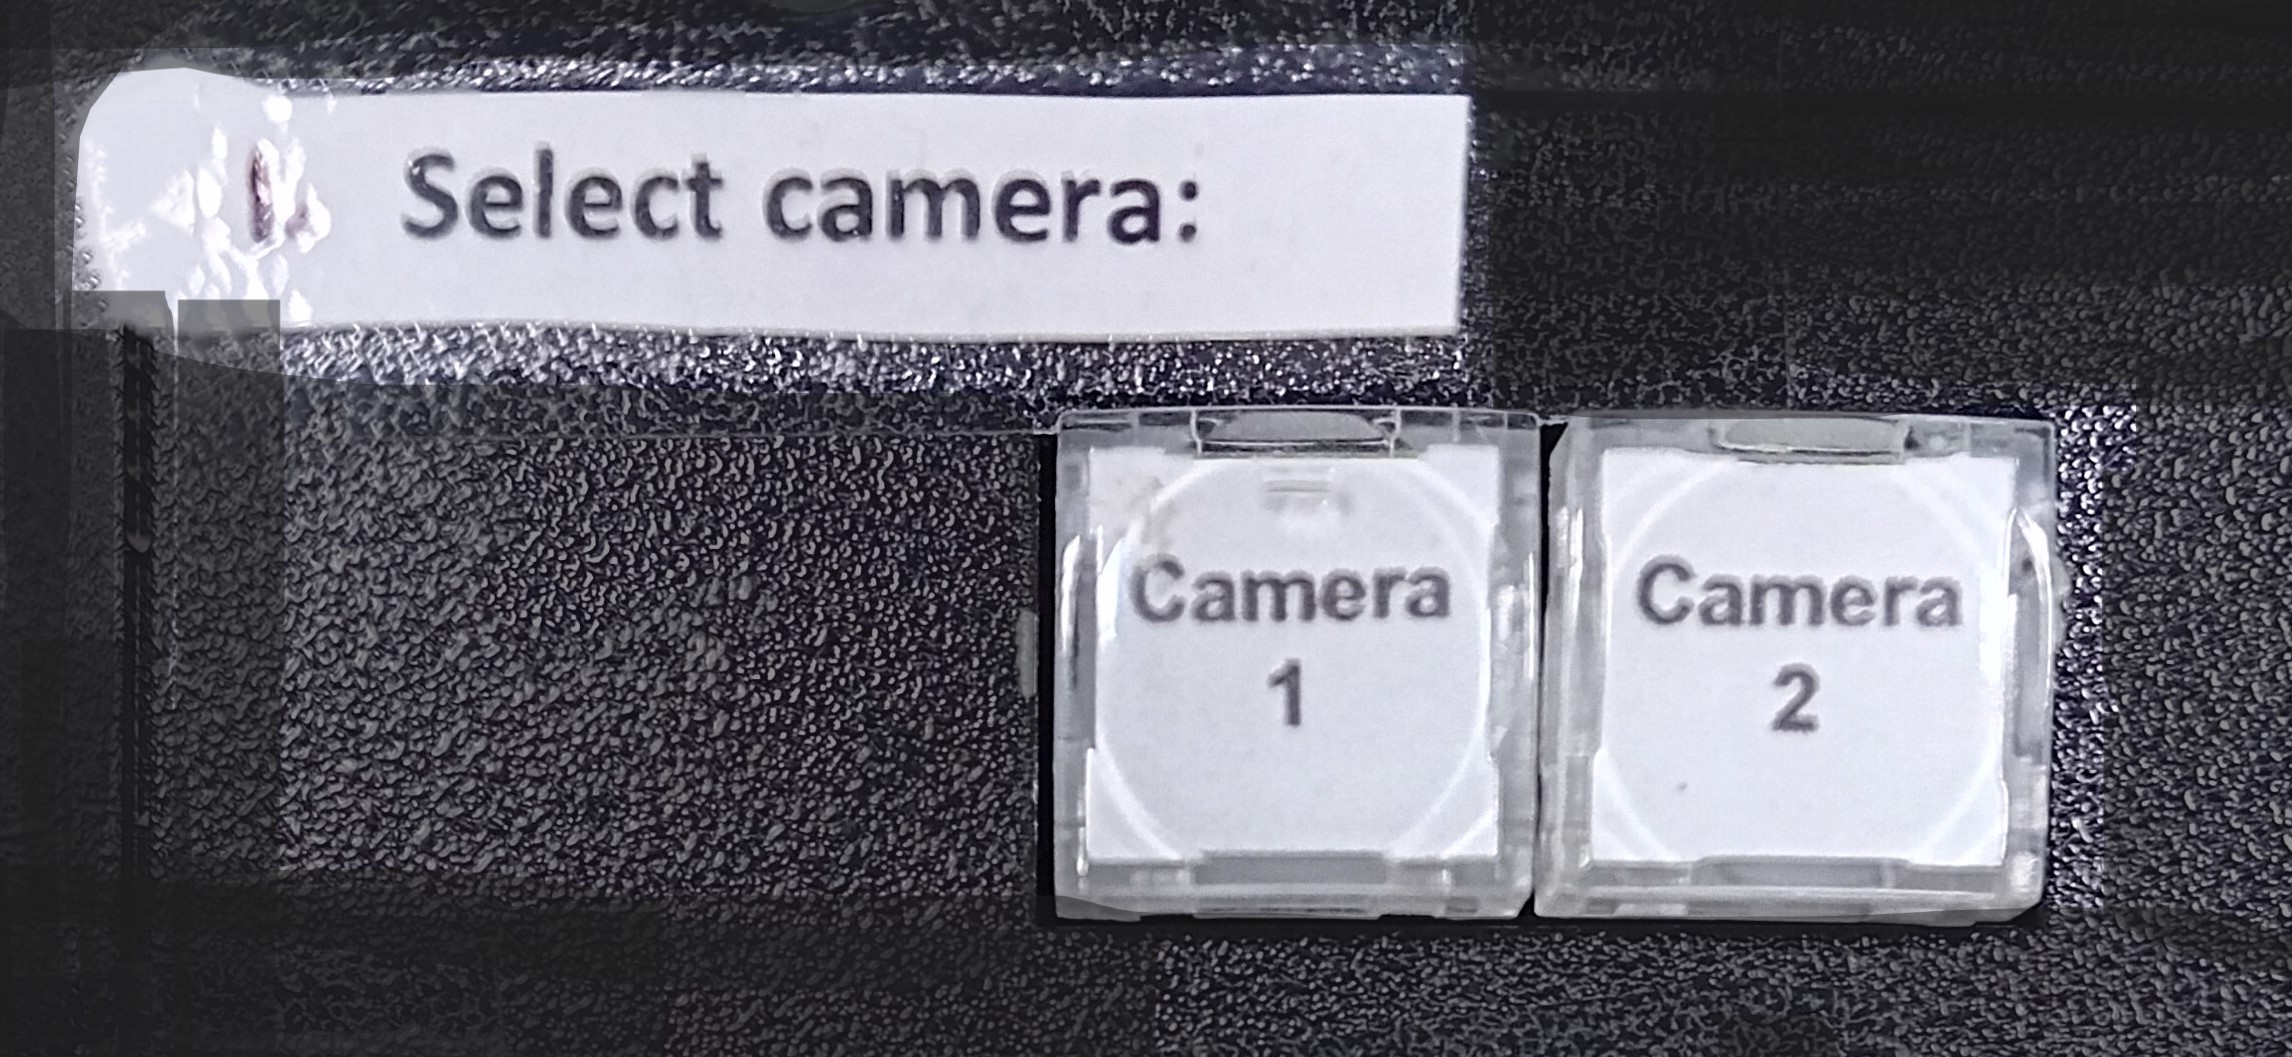 Buttons to choose between the camera displayed